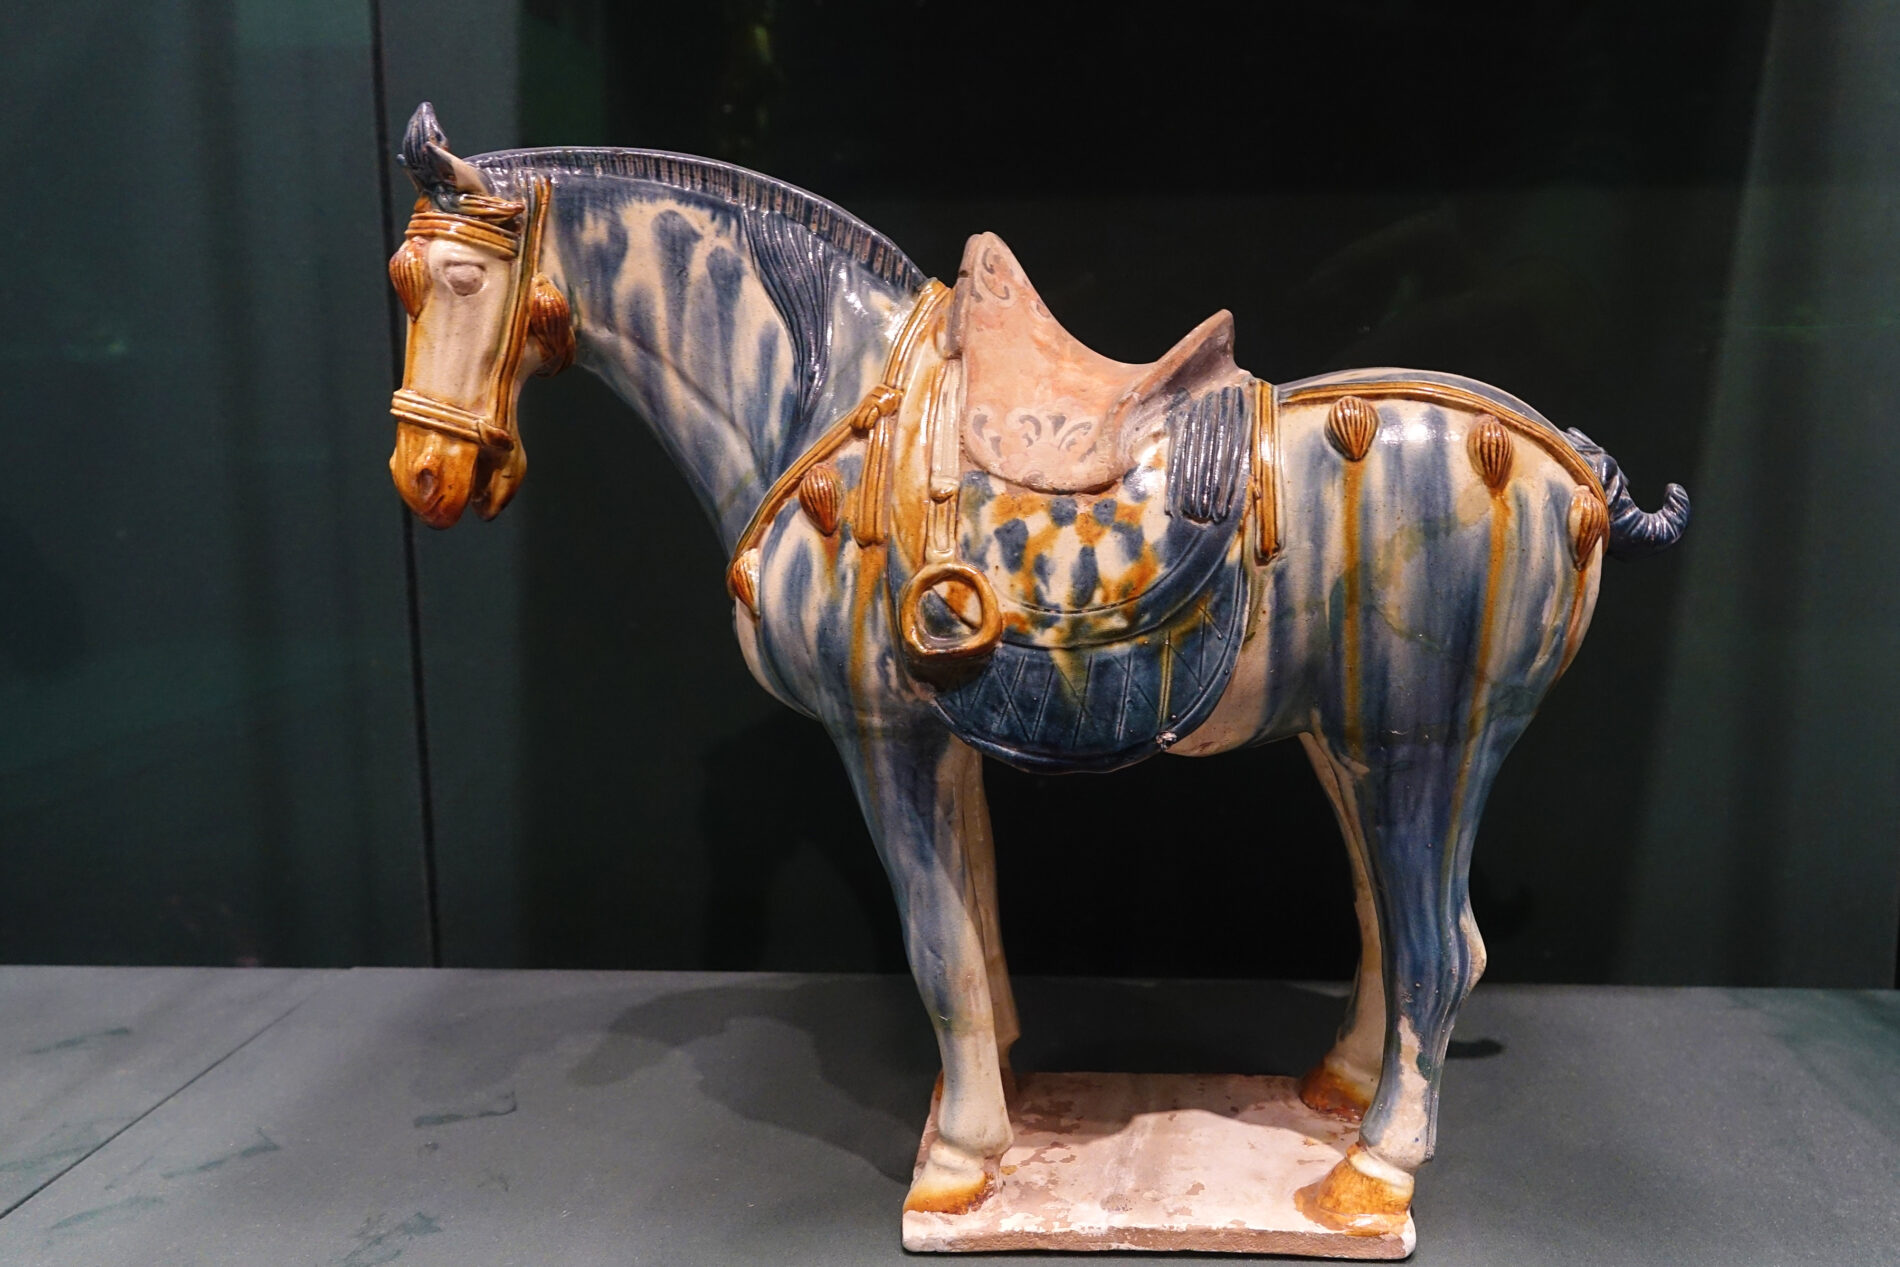 Ceramic horse from the Tang Dynasty at the Asian Art Museum San Francisco.